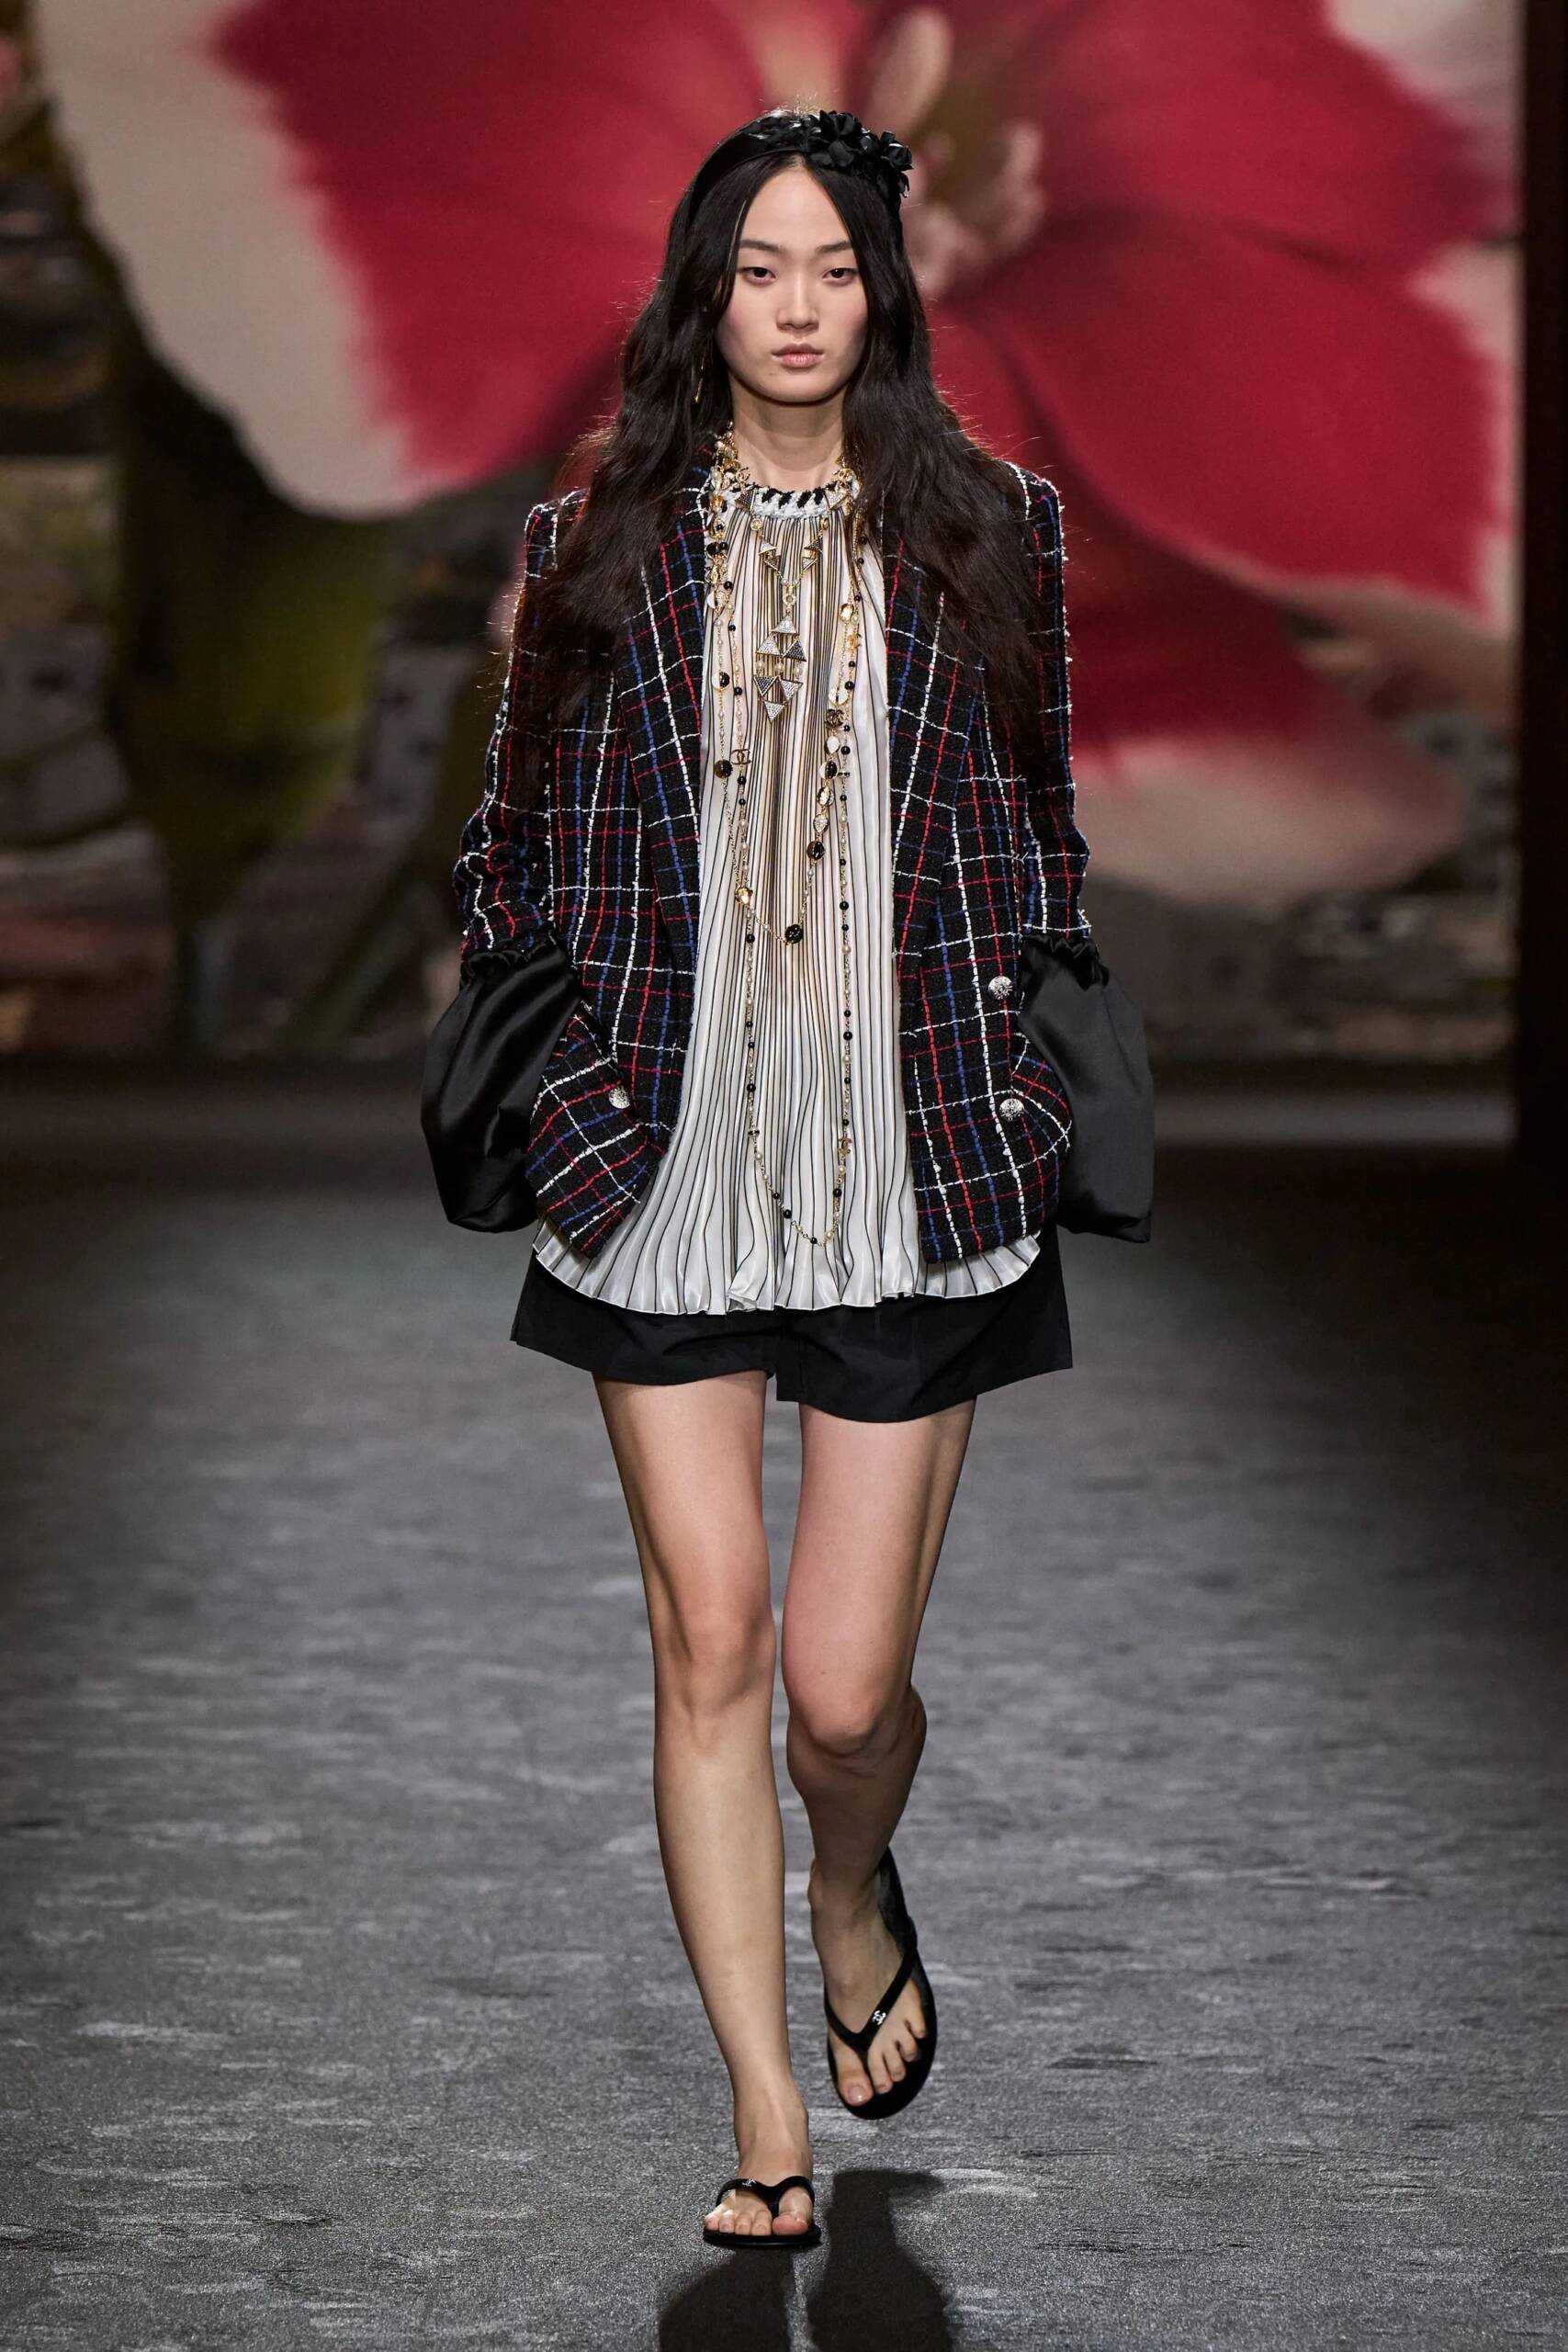 Chanel Leans Into Comfortable Silhouettes and Breezy Layers for